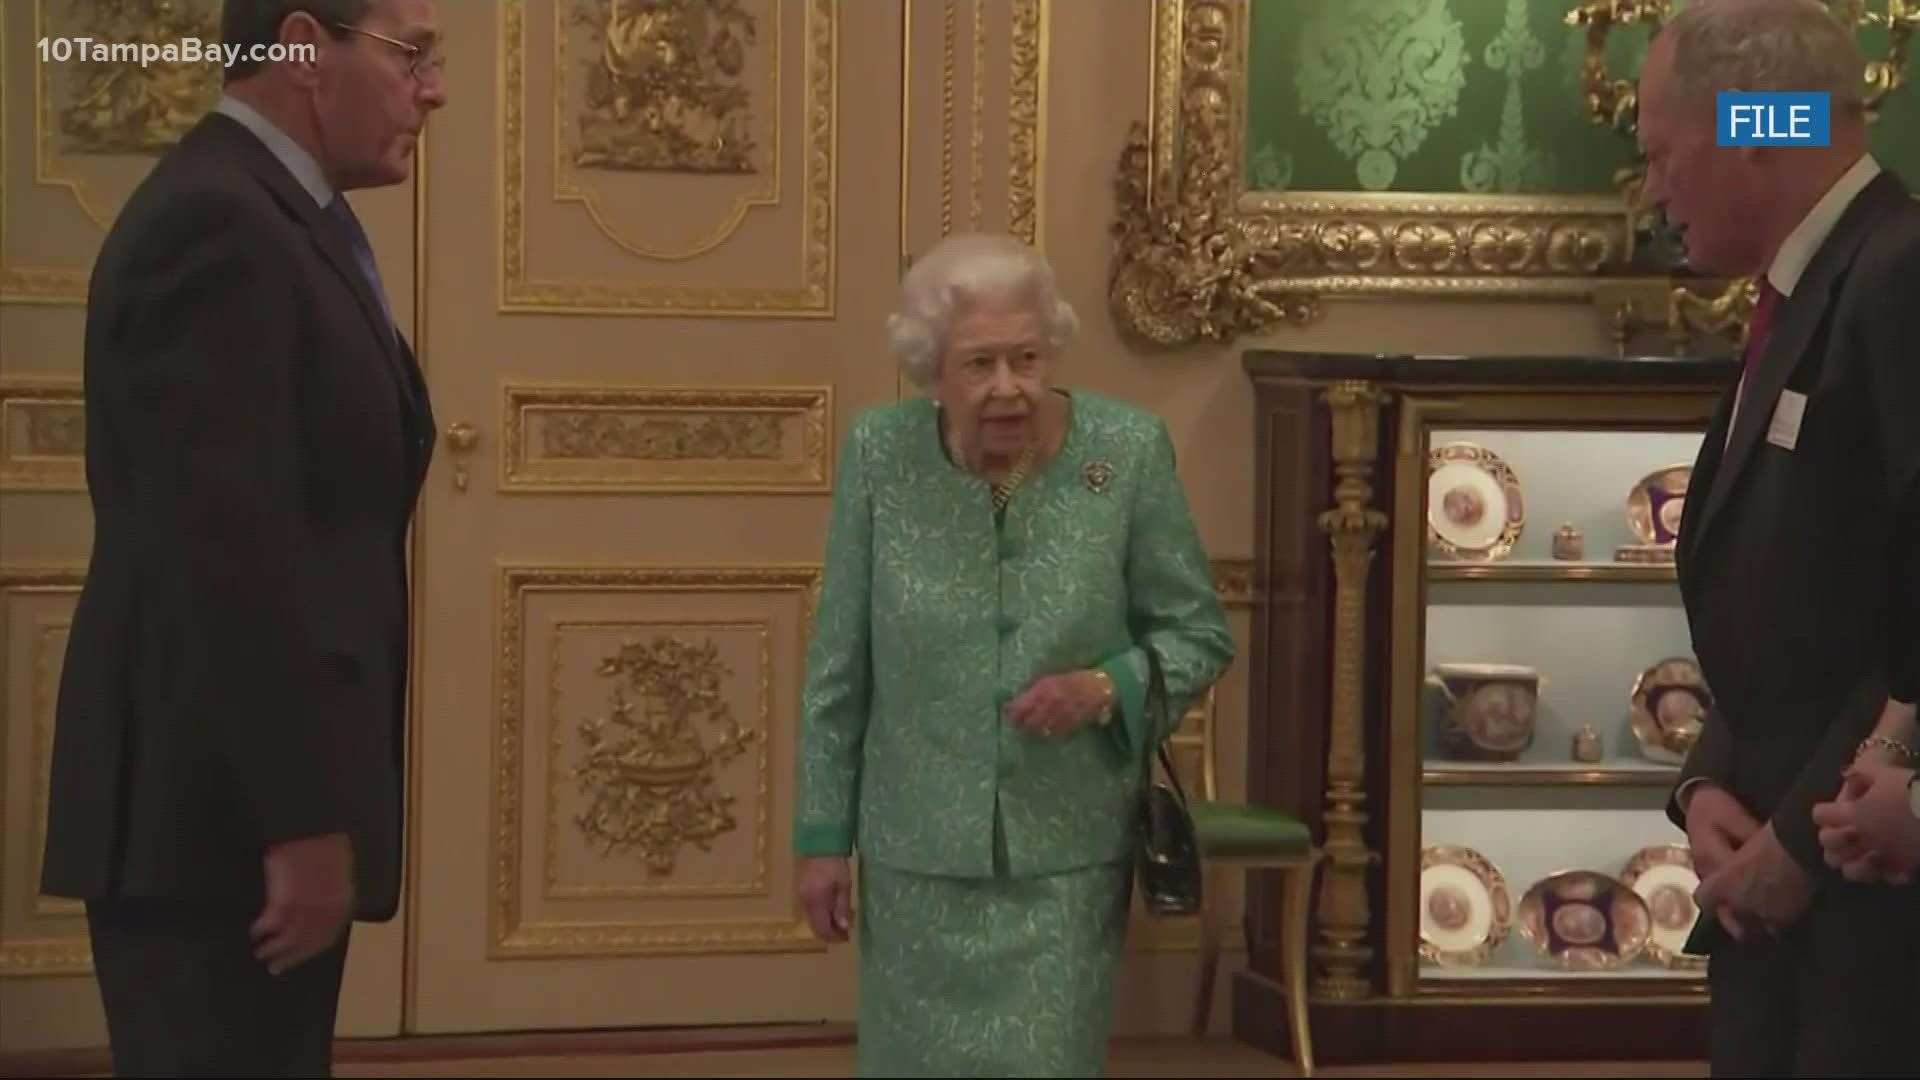 Buckingham Palace said the 95-year-old British monarch is experiencing mild, cold-like symptoms.